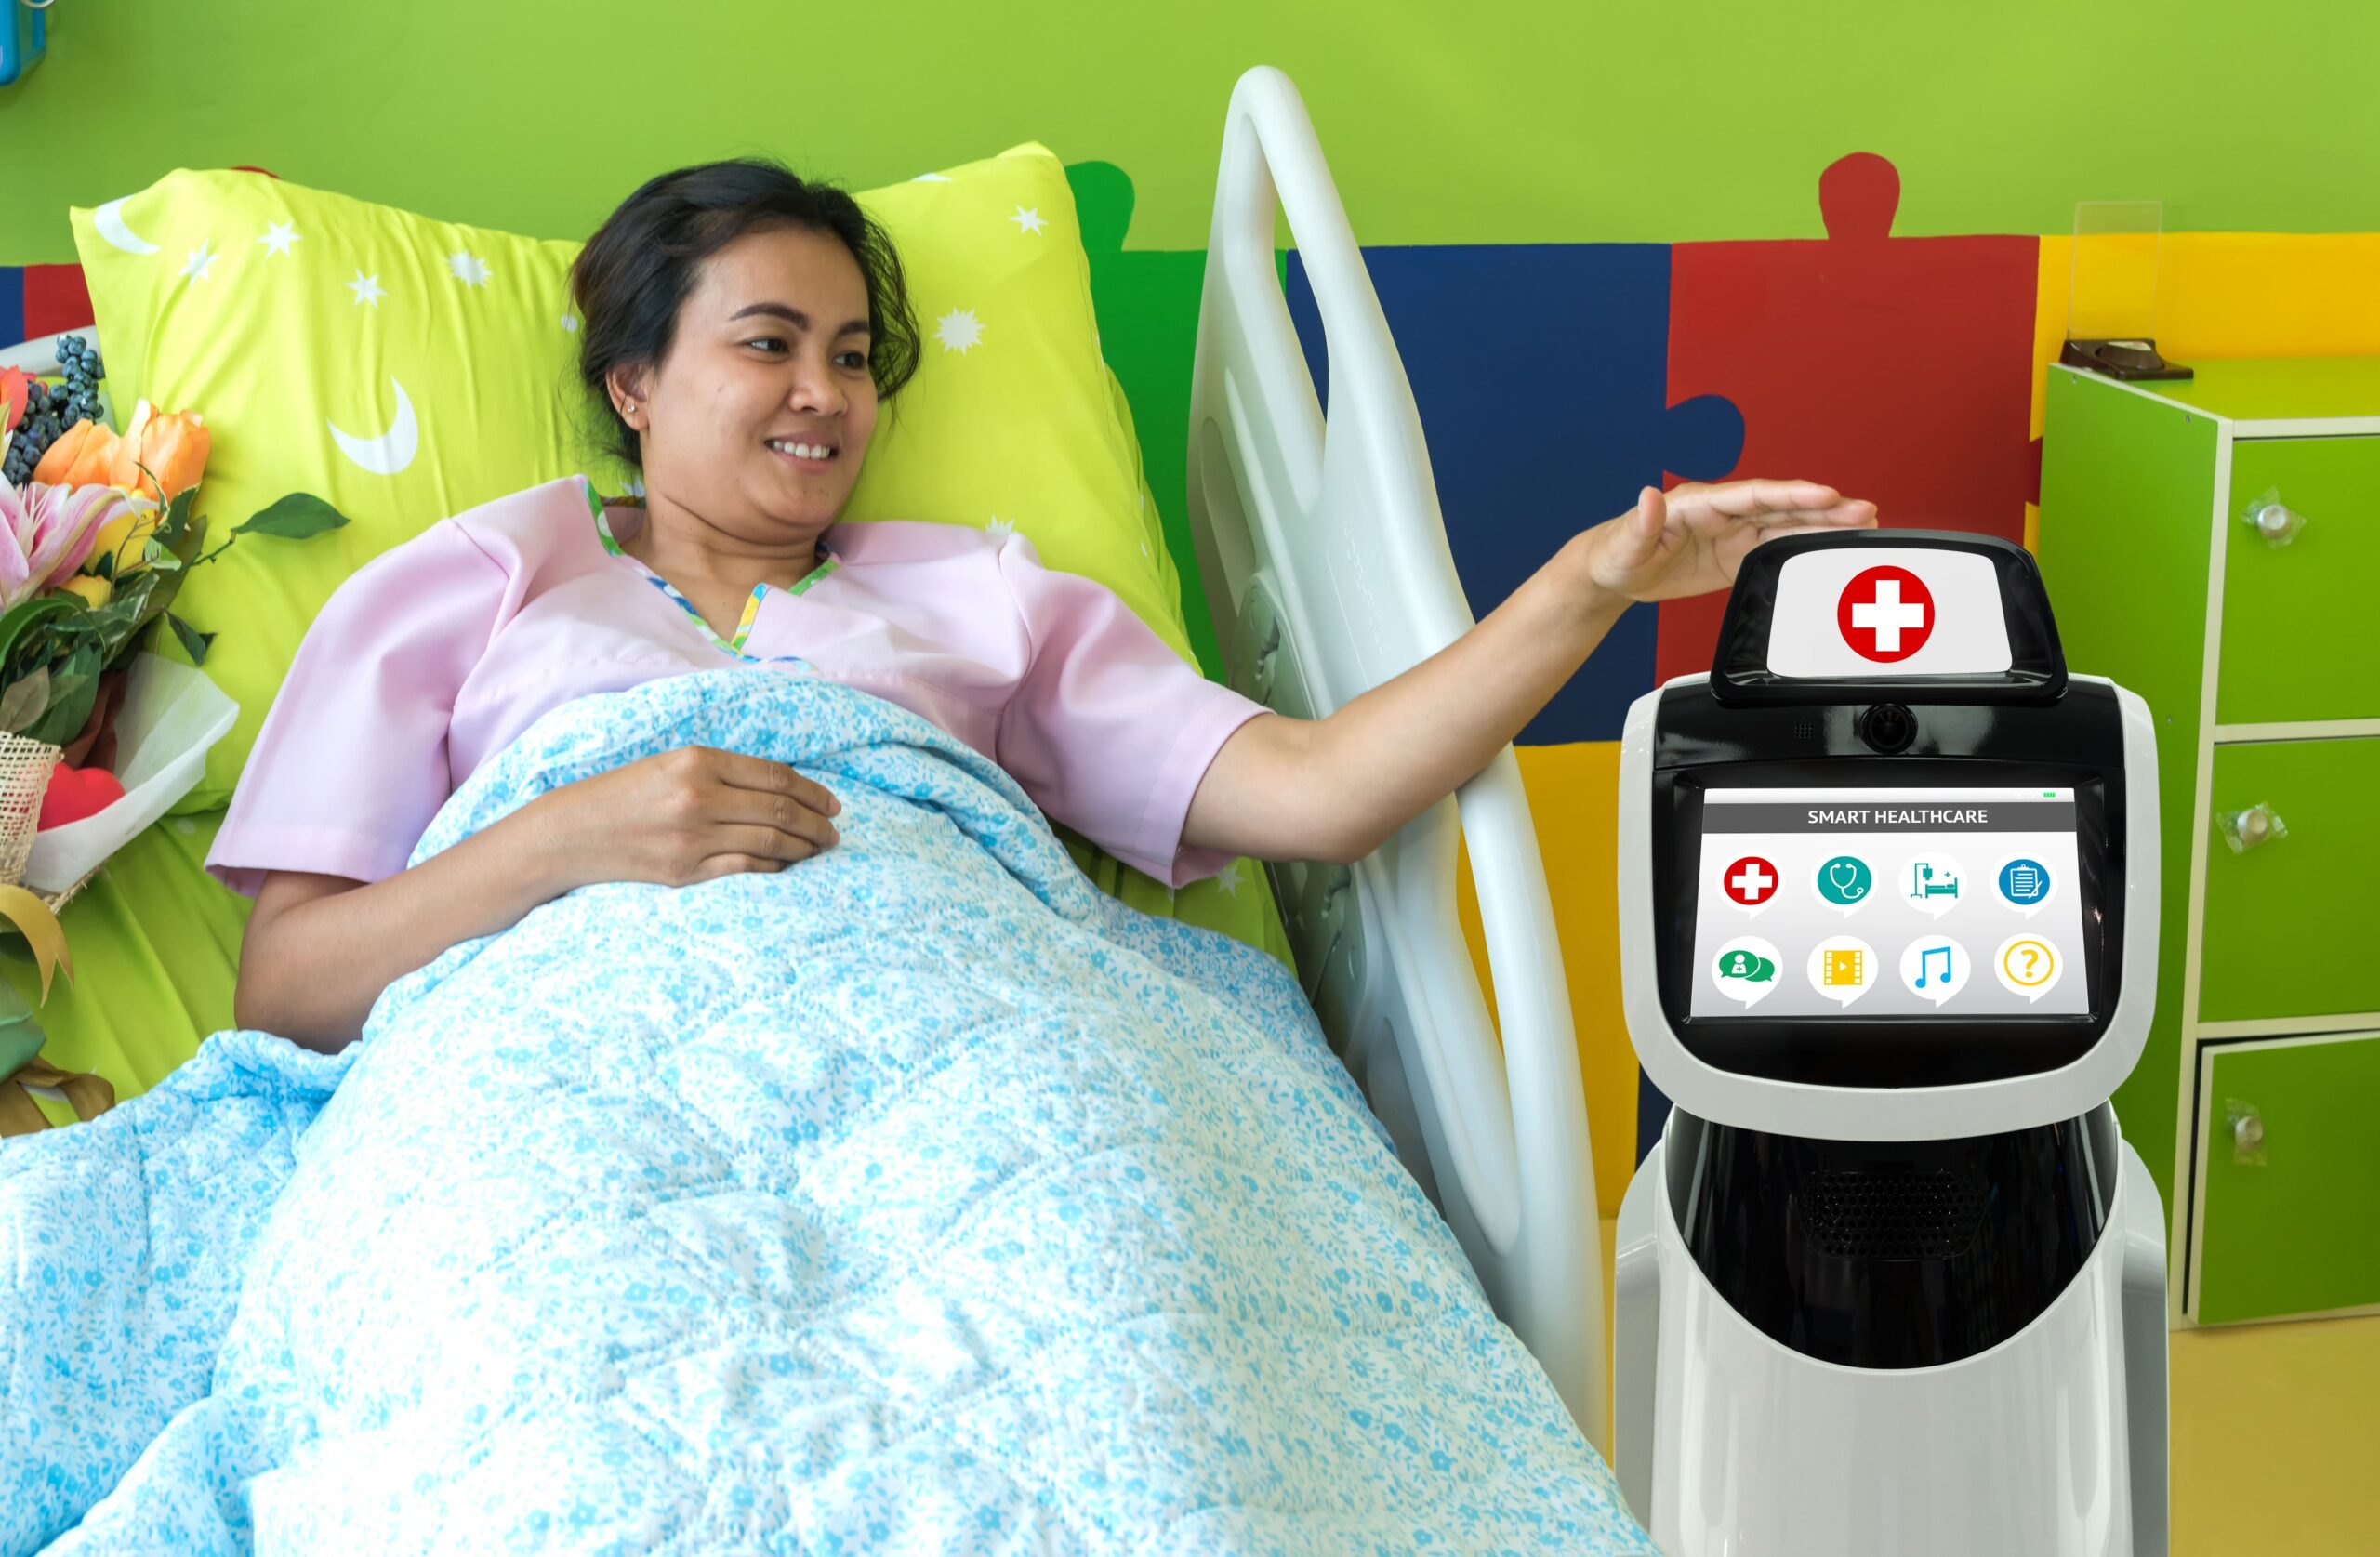 Female patient interacting with hospital robot